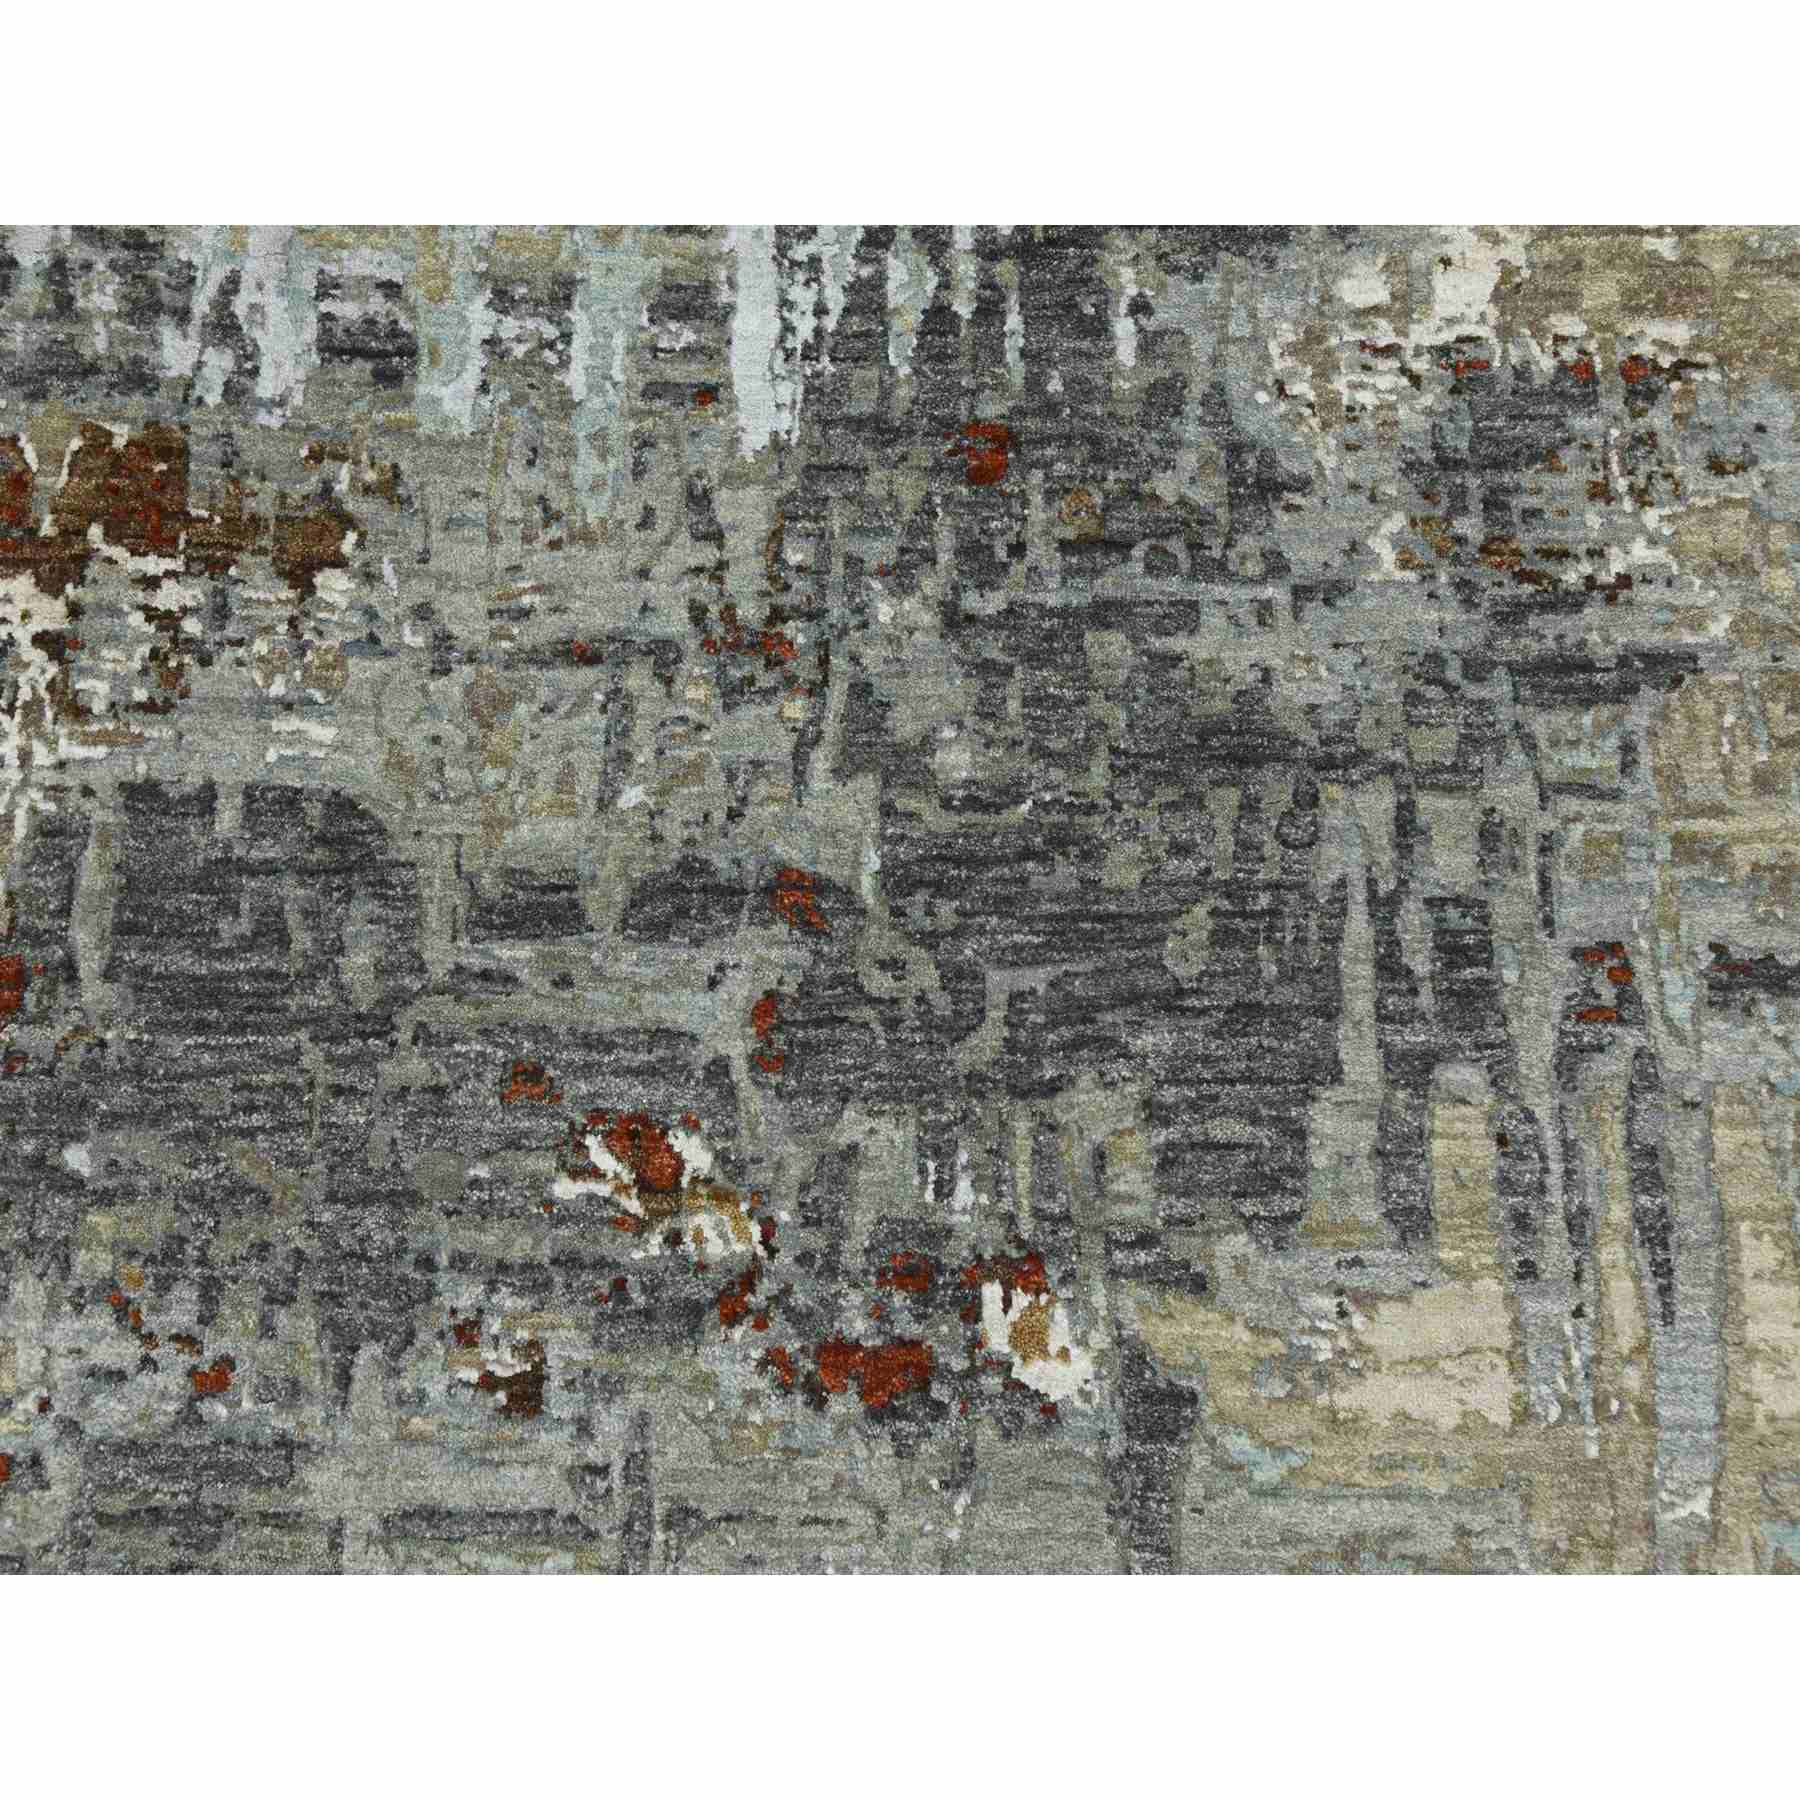 Modern-and-Contemporary-Hand-Knotted-Rug-415280